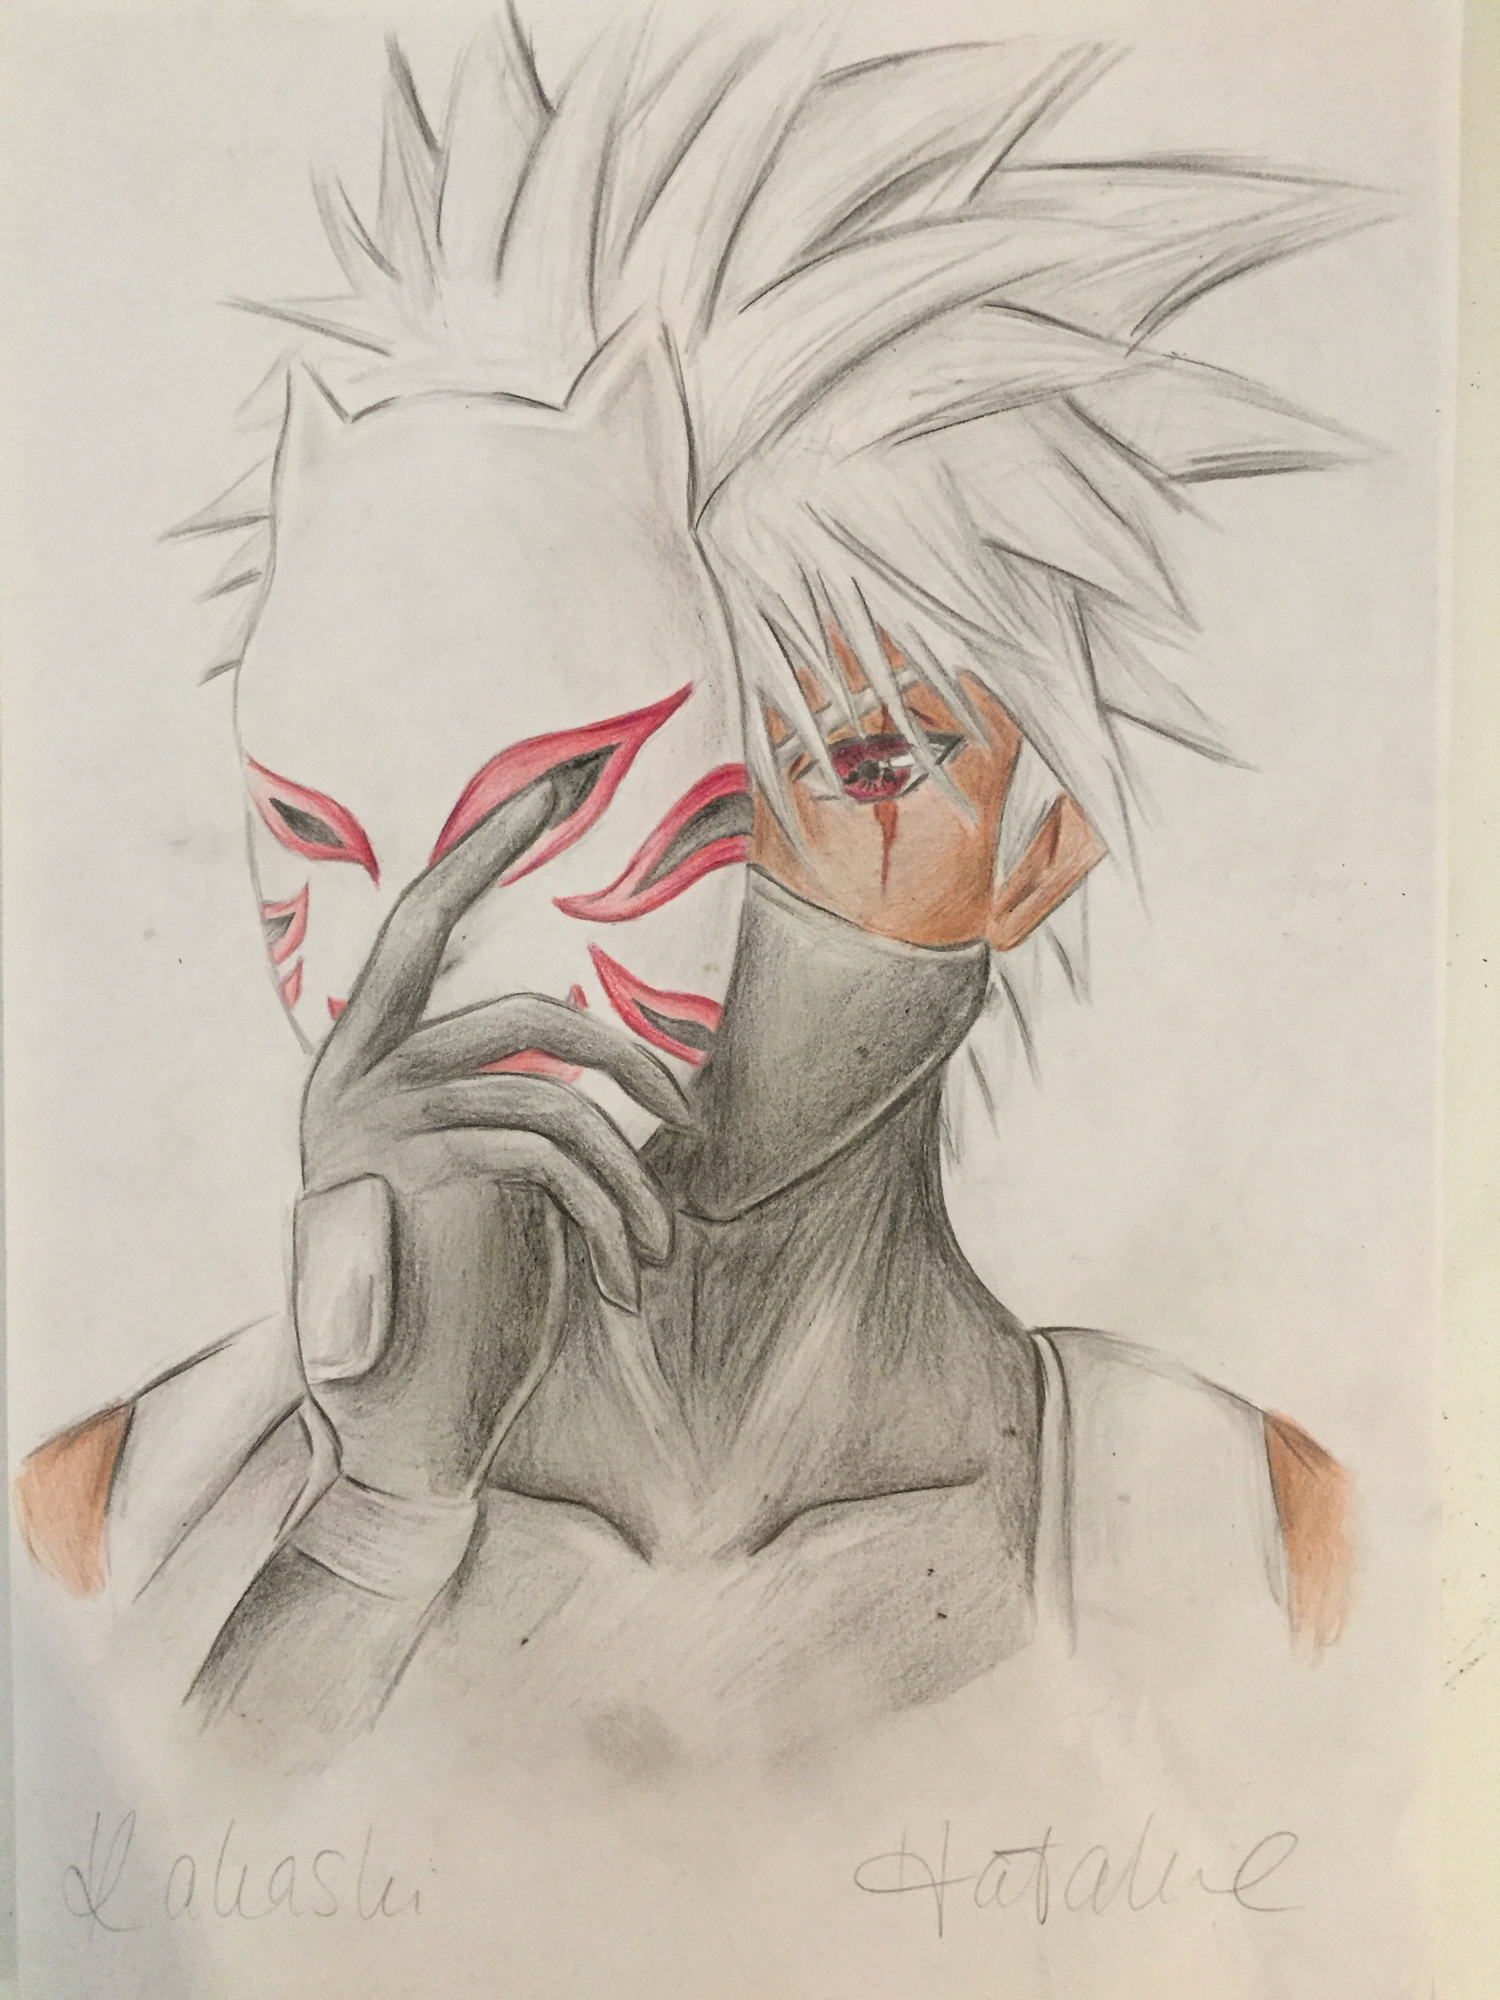 Kakashi from Naruto as a real human and wear a robot...